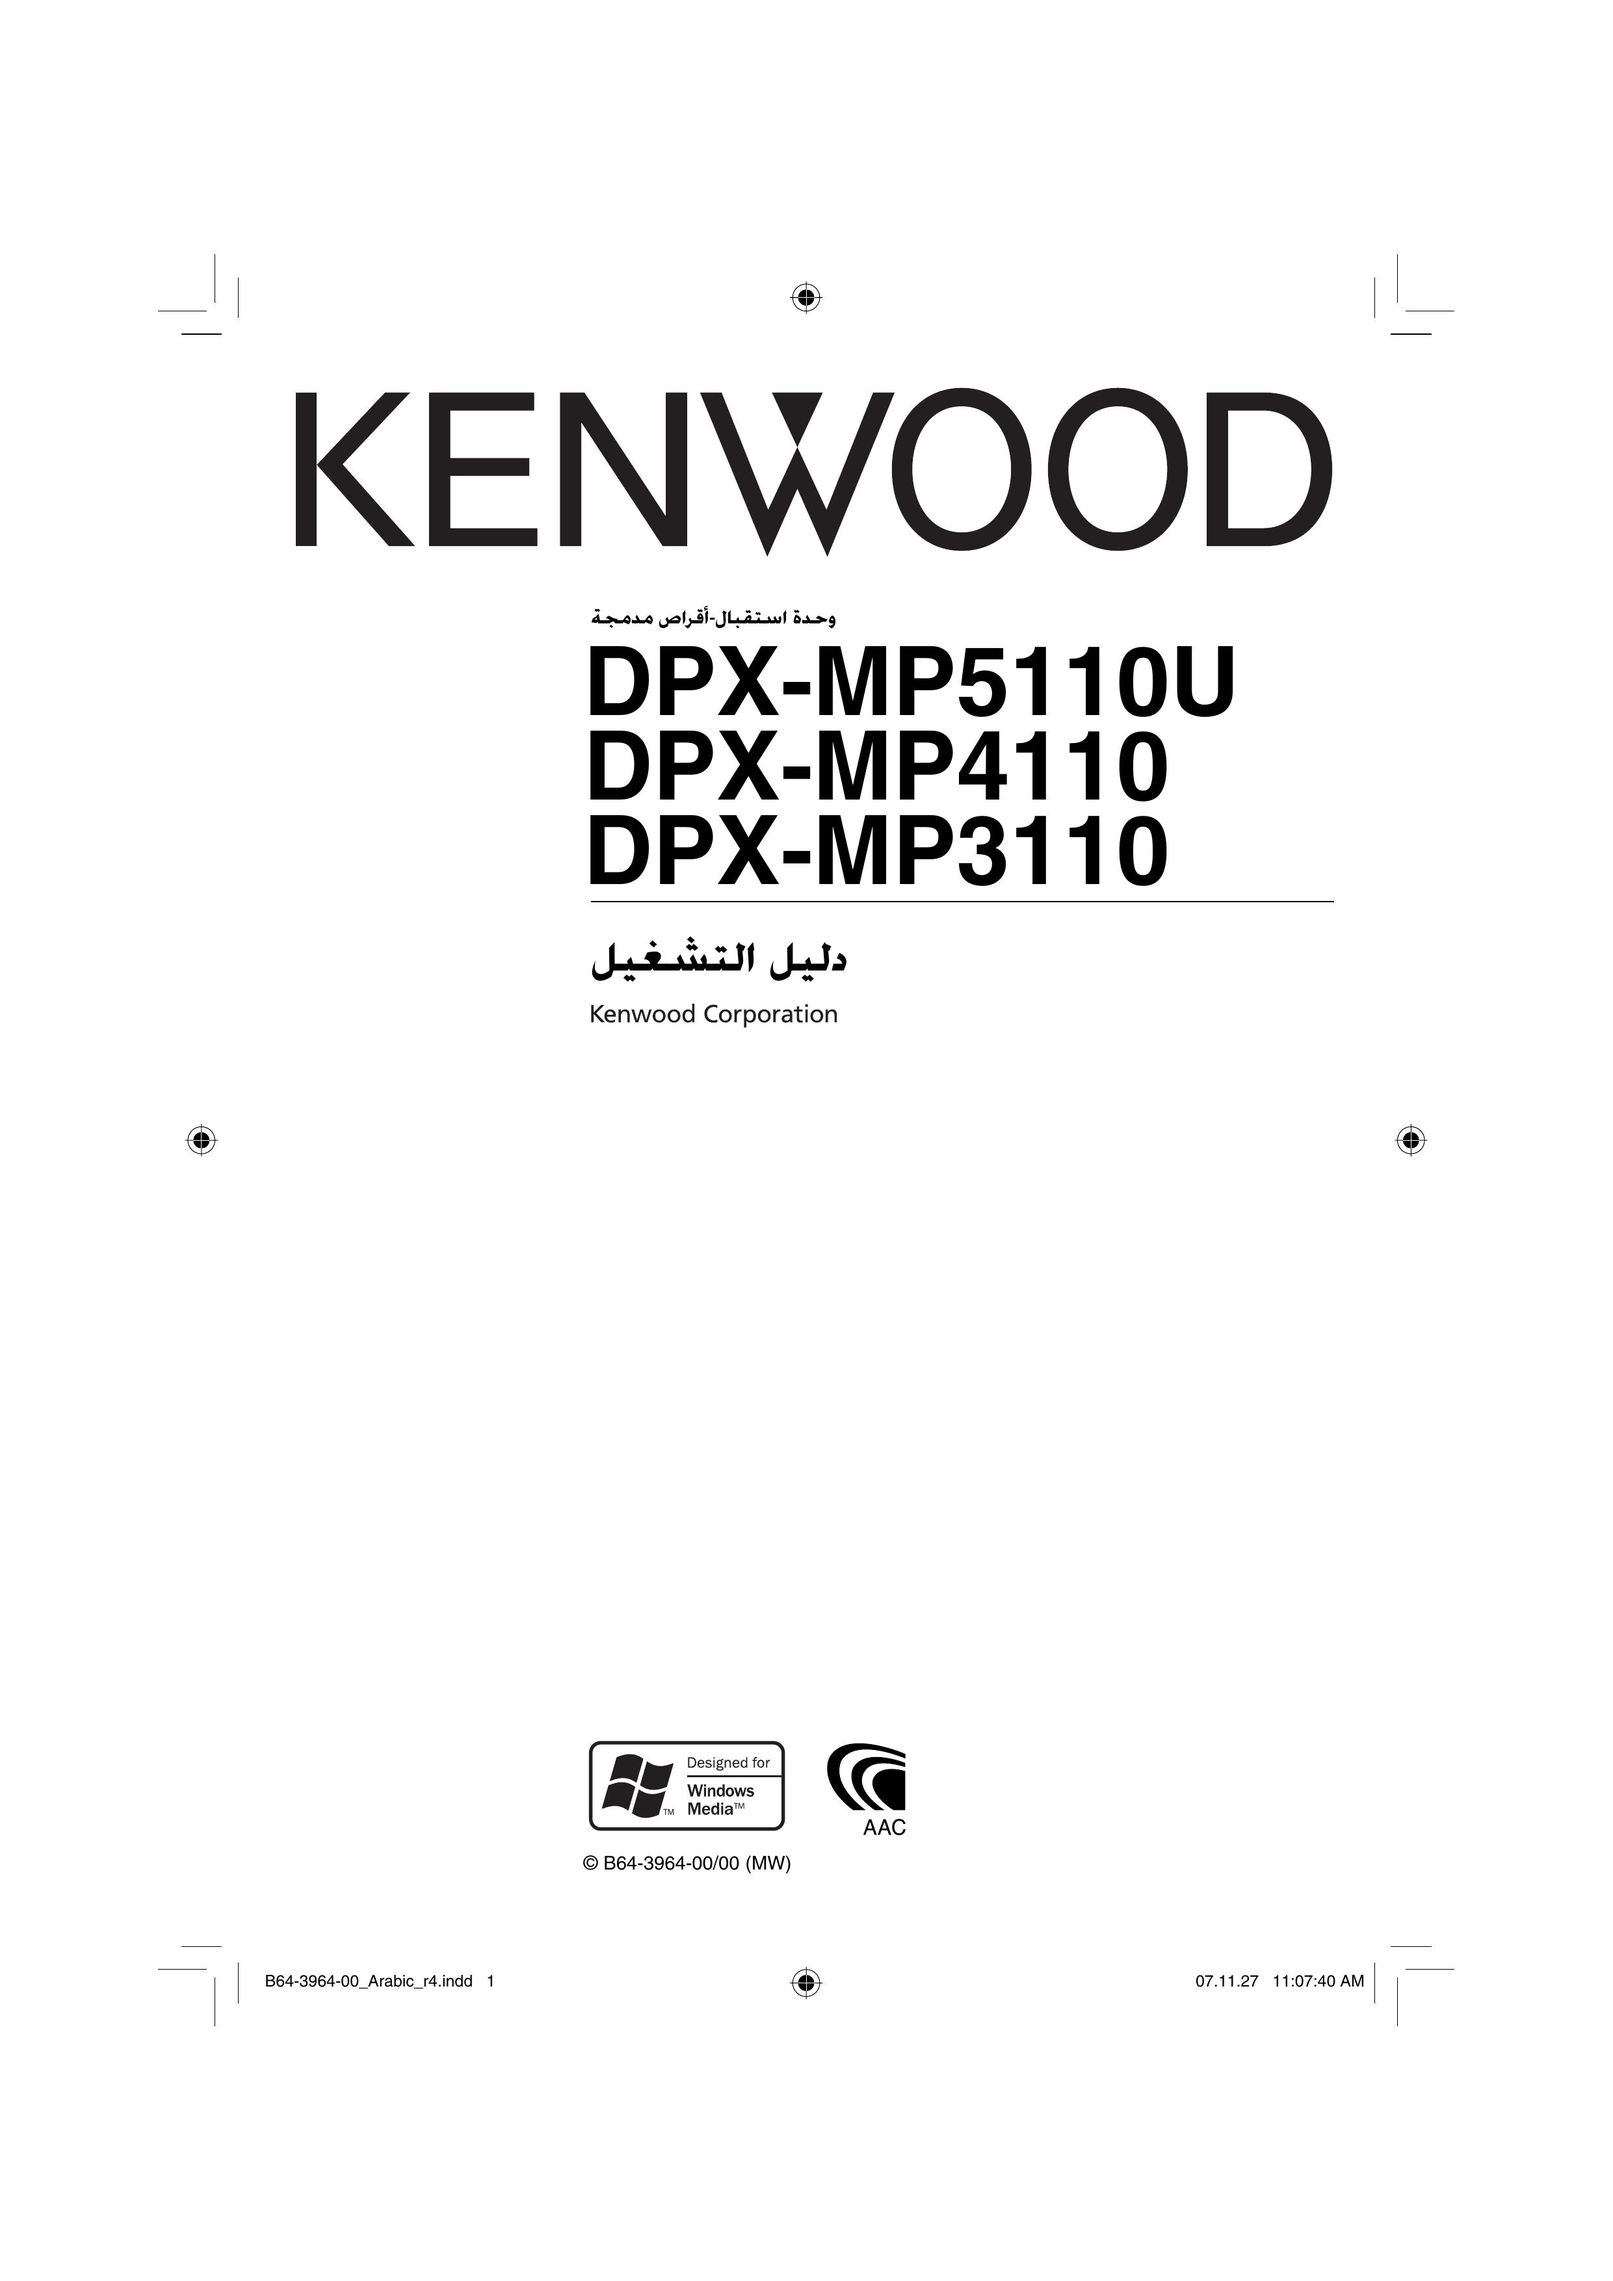 Kenwood DPX-MP5110U Stereo System User Manual